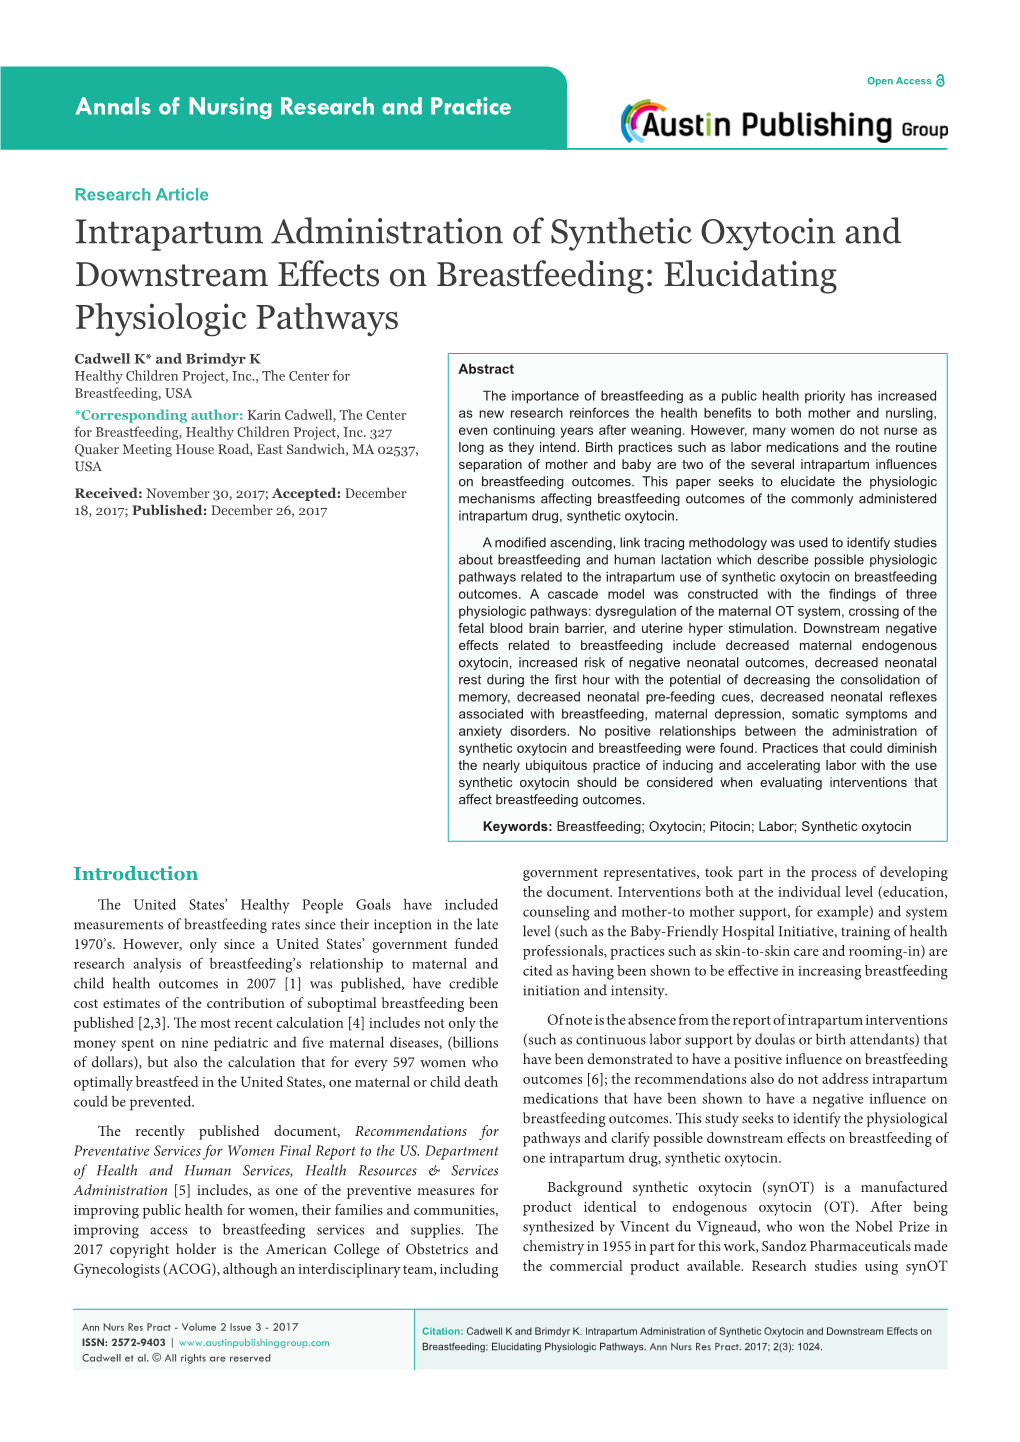 Intrapartum Administration of Synthetic Oxytocin and Downstream Effects on Breastfeeding: Elucidating Physiologic Pathways